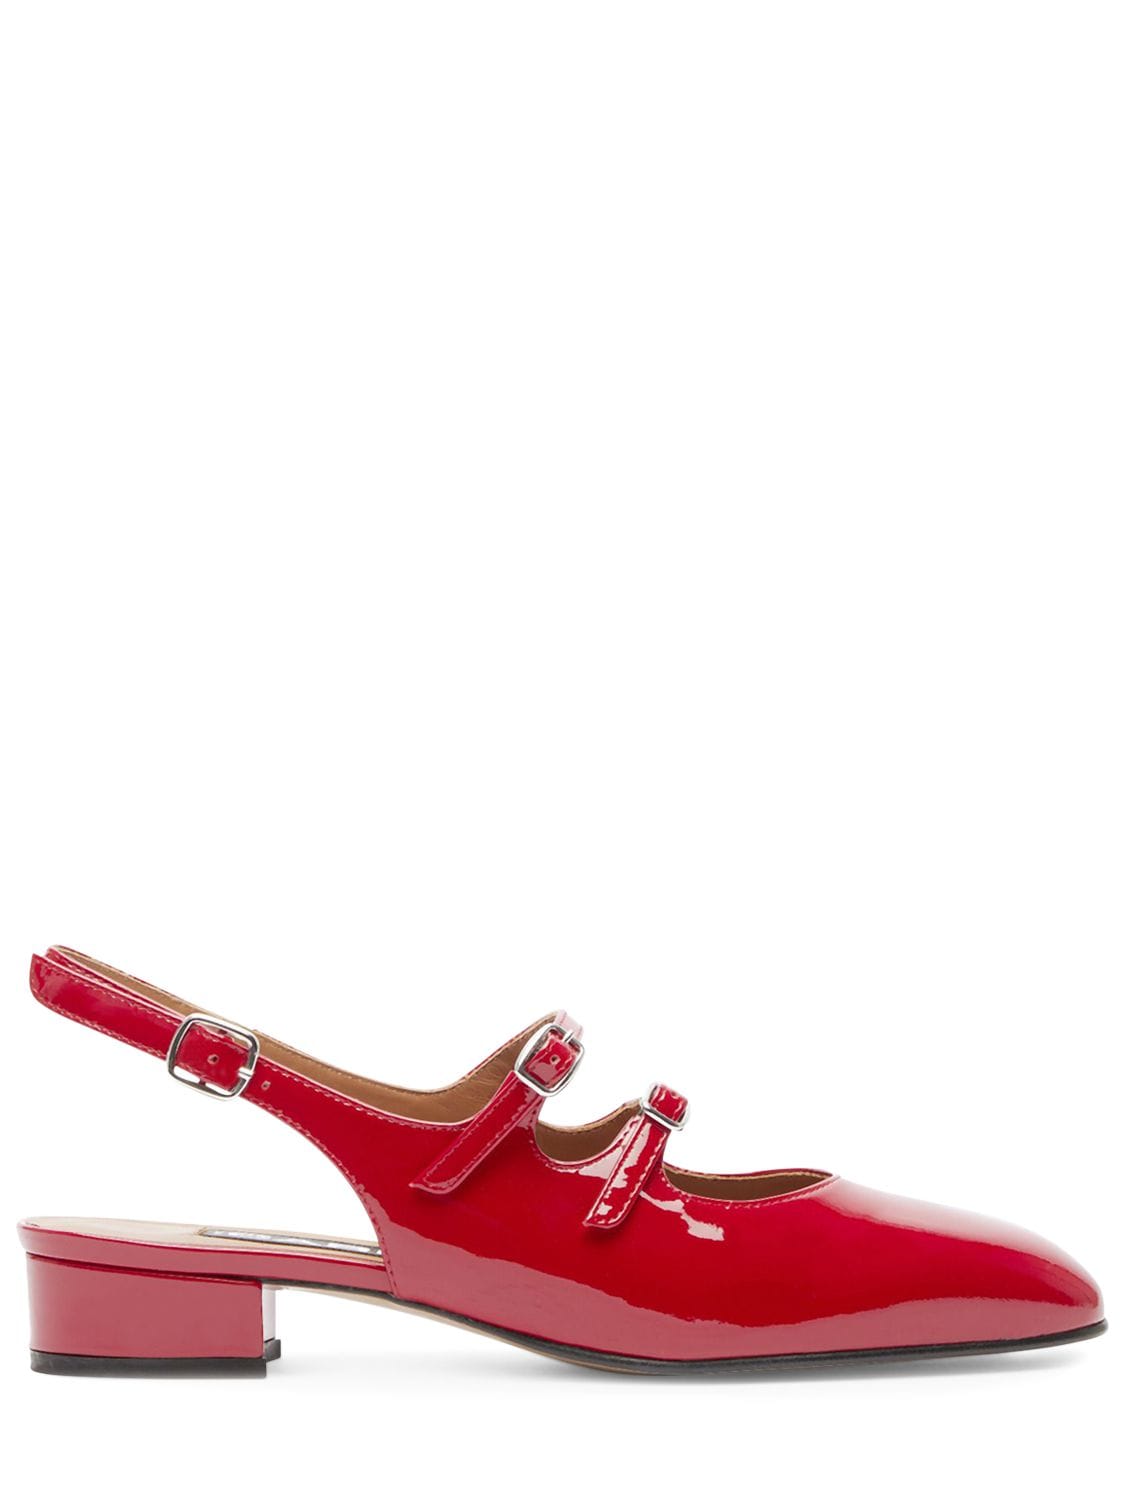 Image of 20mm Peche Patent Leather Slingbacks